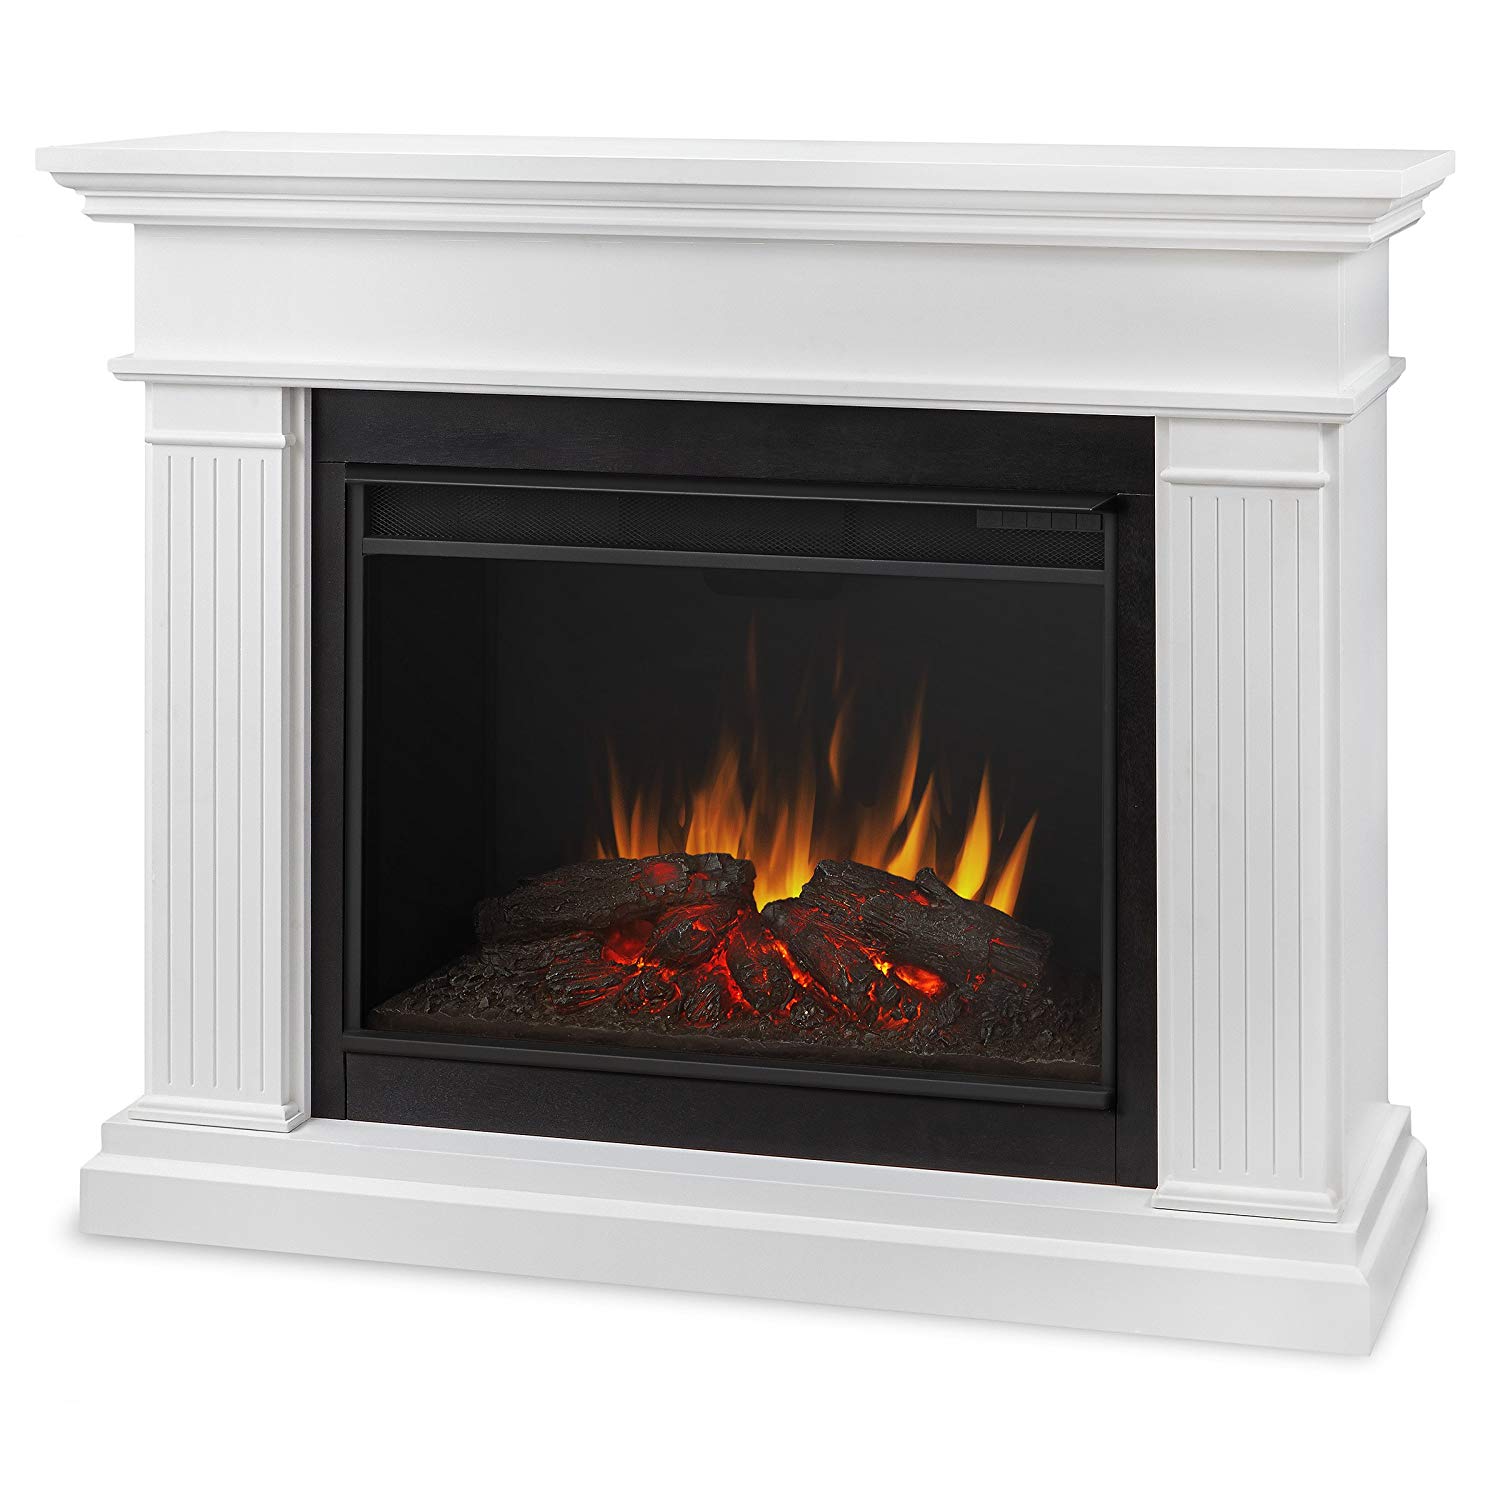 Infrared Fireplace Heater Best Of White Fireplace Electric Charming Fireplace